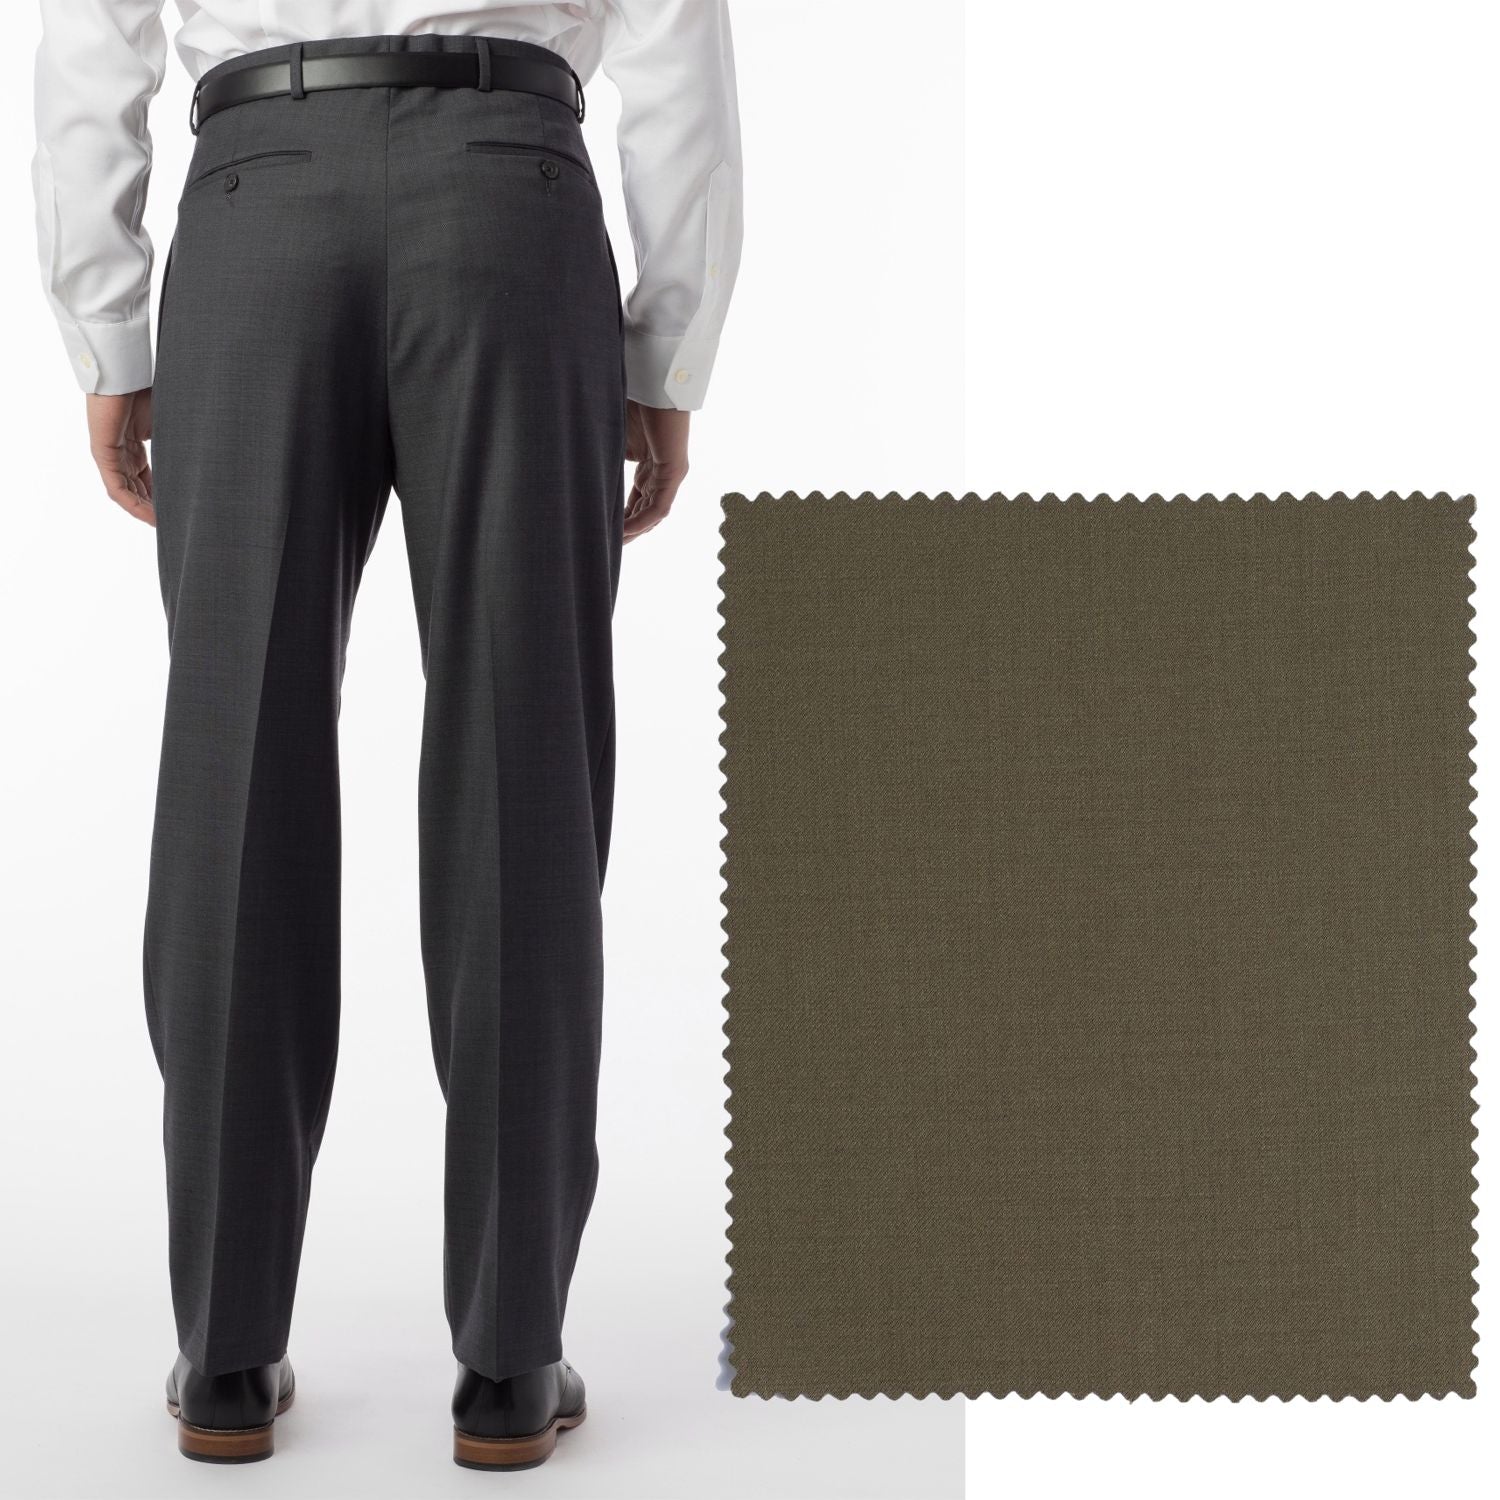 Super 120s Luxury Wool Serge Comfort-EZE Trouser in Olive (Manchester Pleated Model) by Ballin